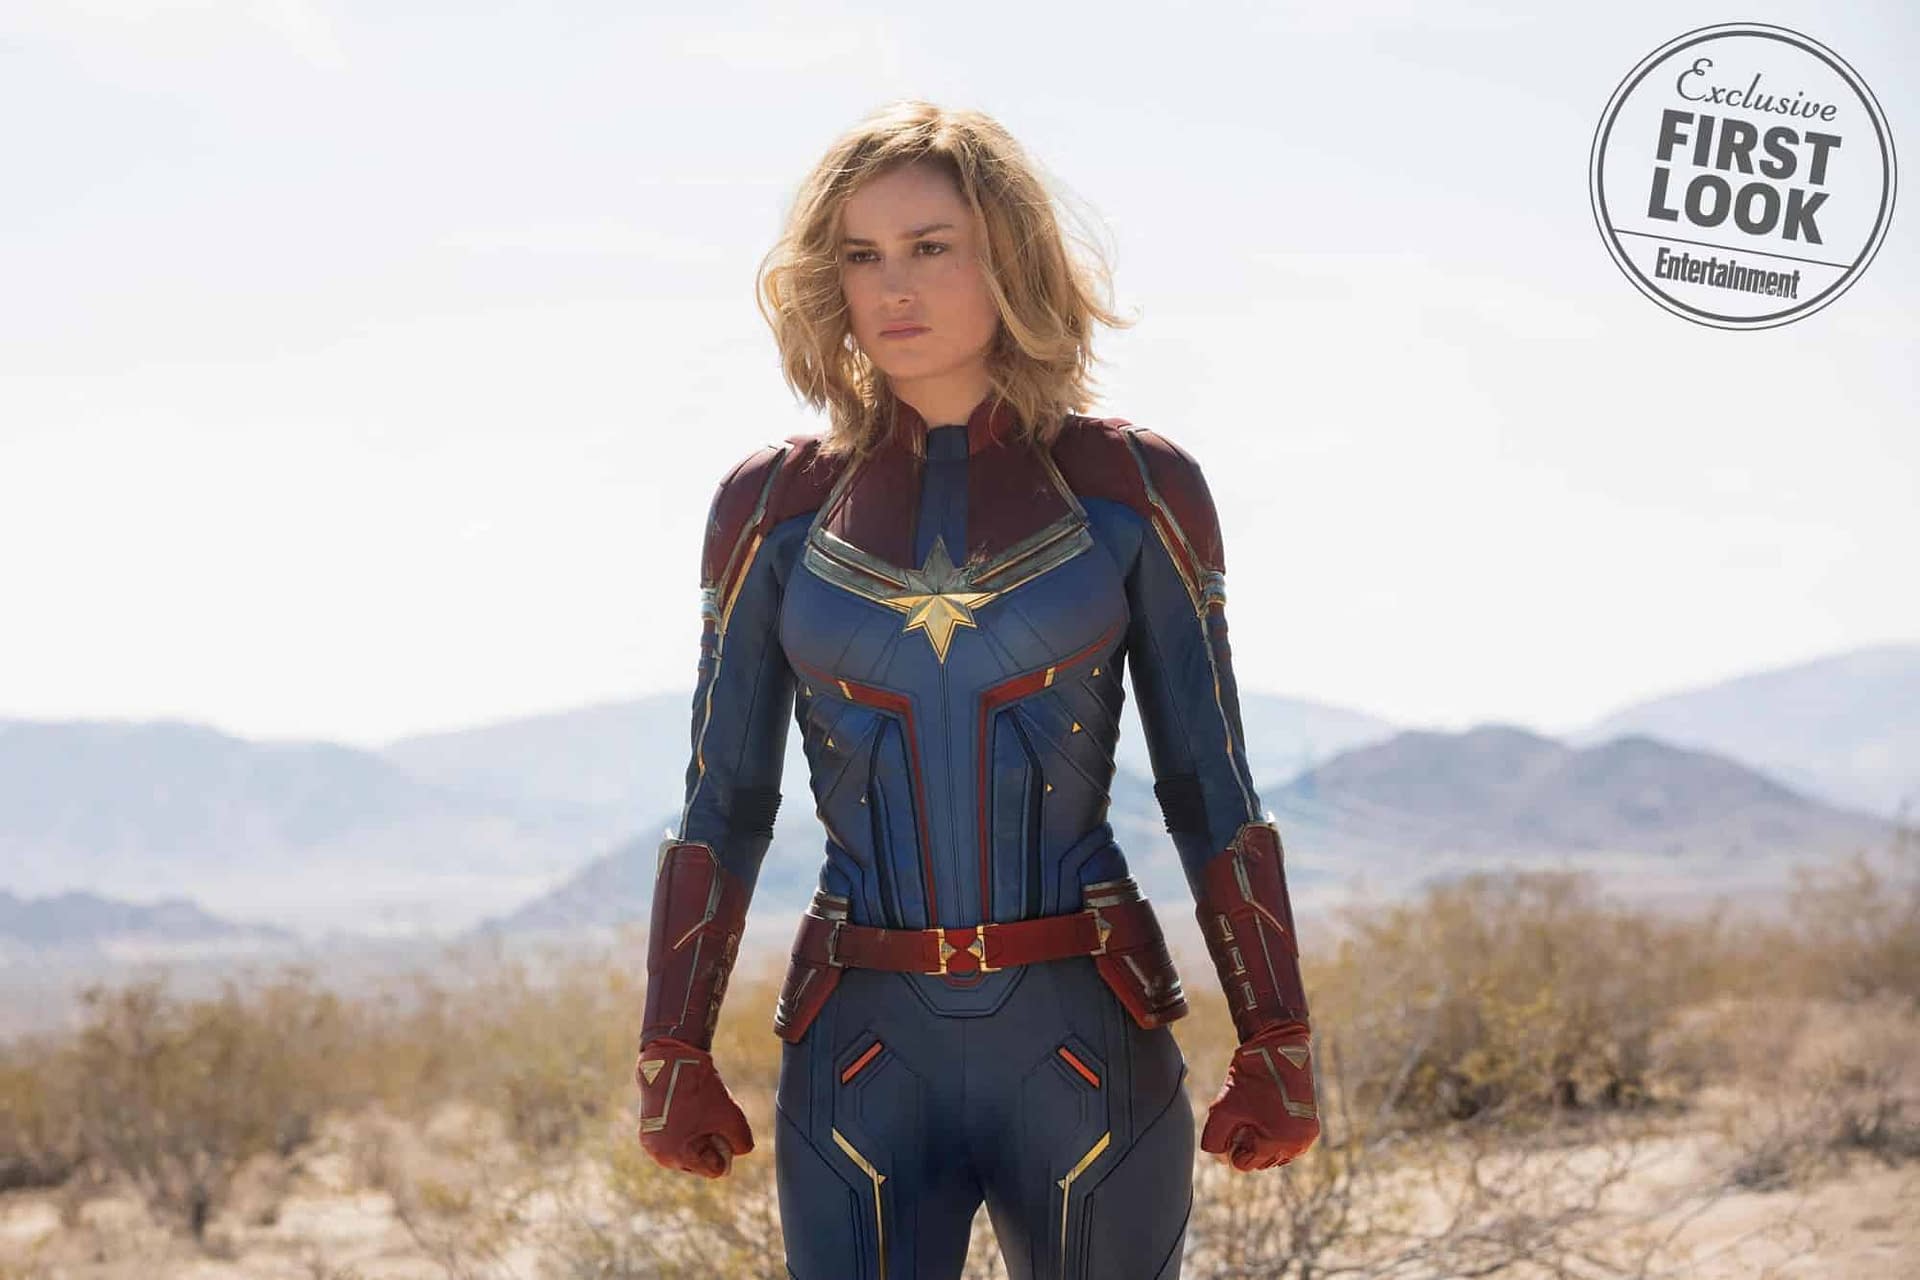 Kevin Feige Tries To Explain Why a Solo Female Marvel Movie Took So Long